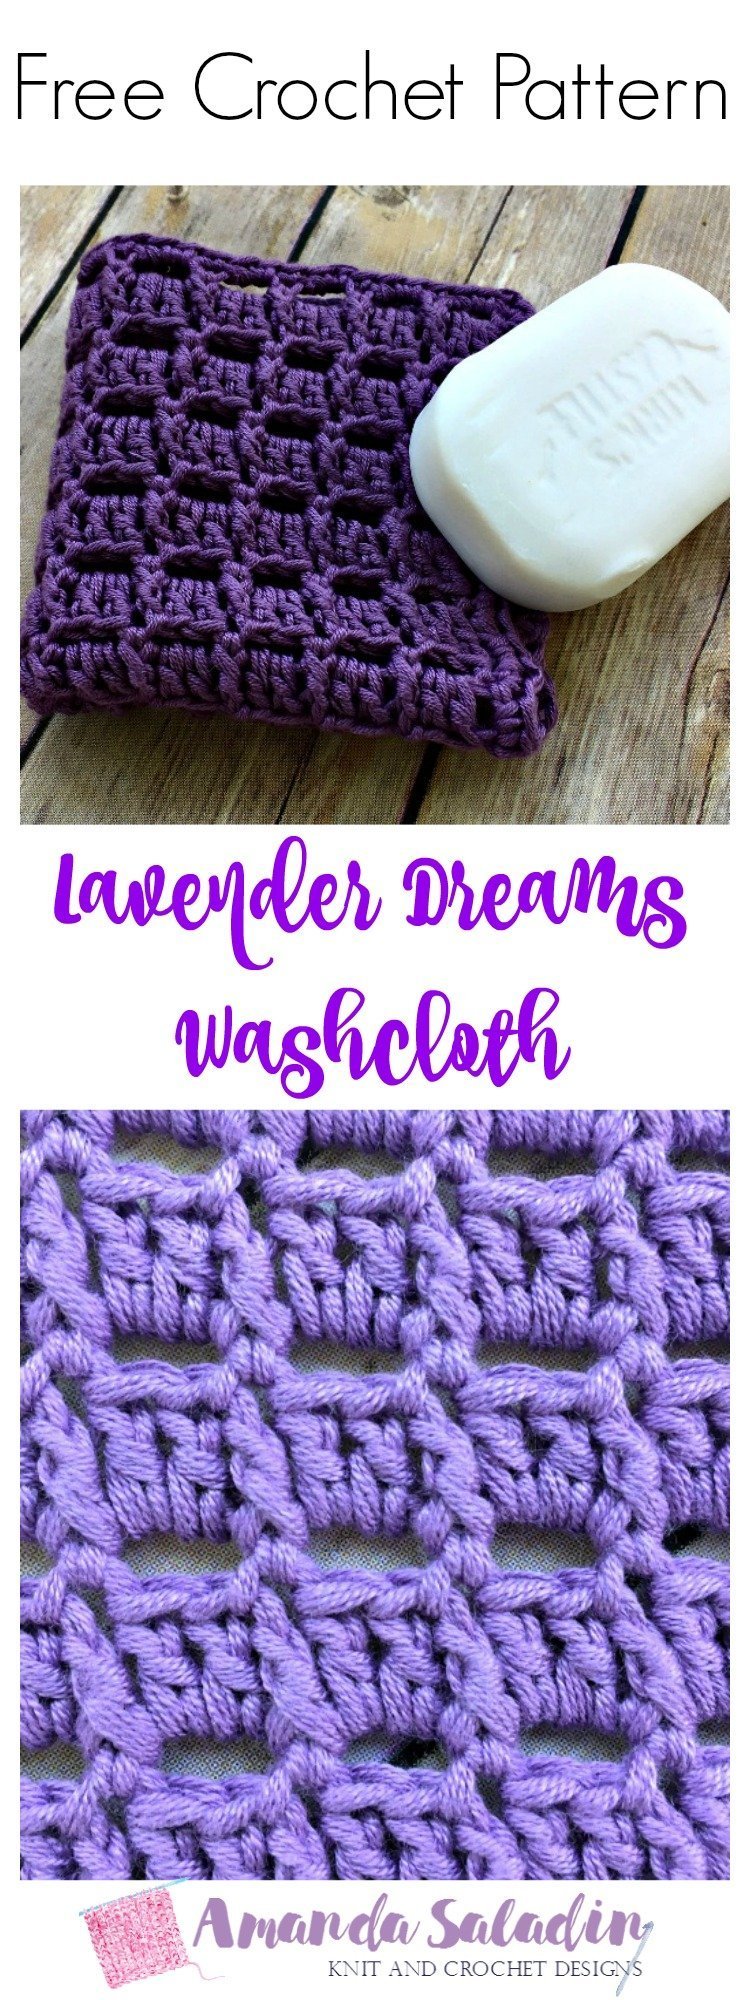 Free Crochet Pattern - SO quick and easy! I made a bunch of these :)